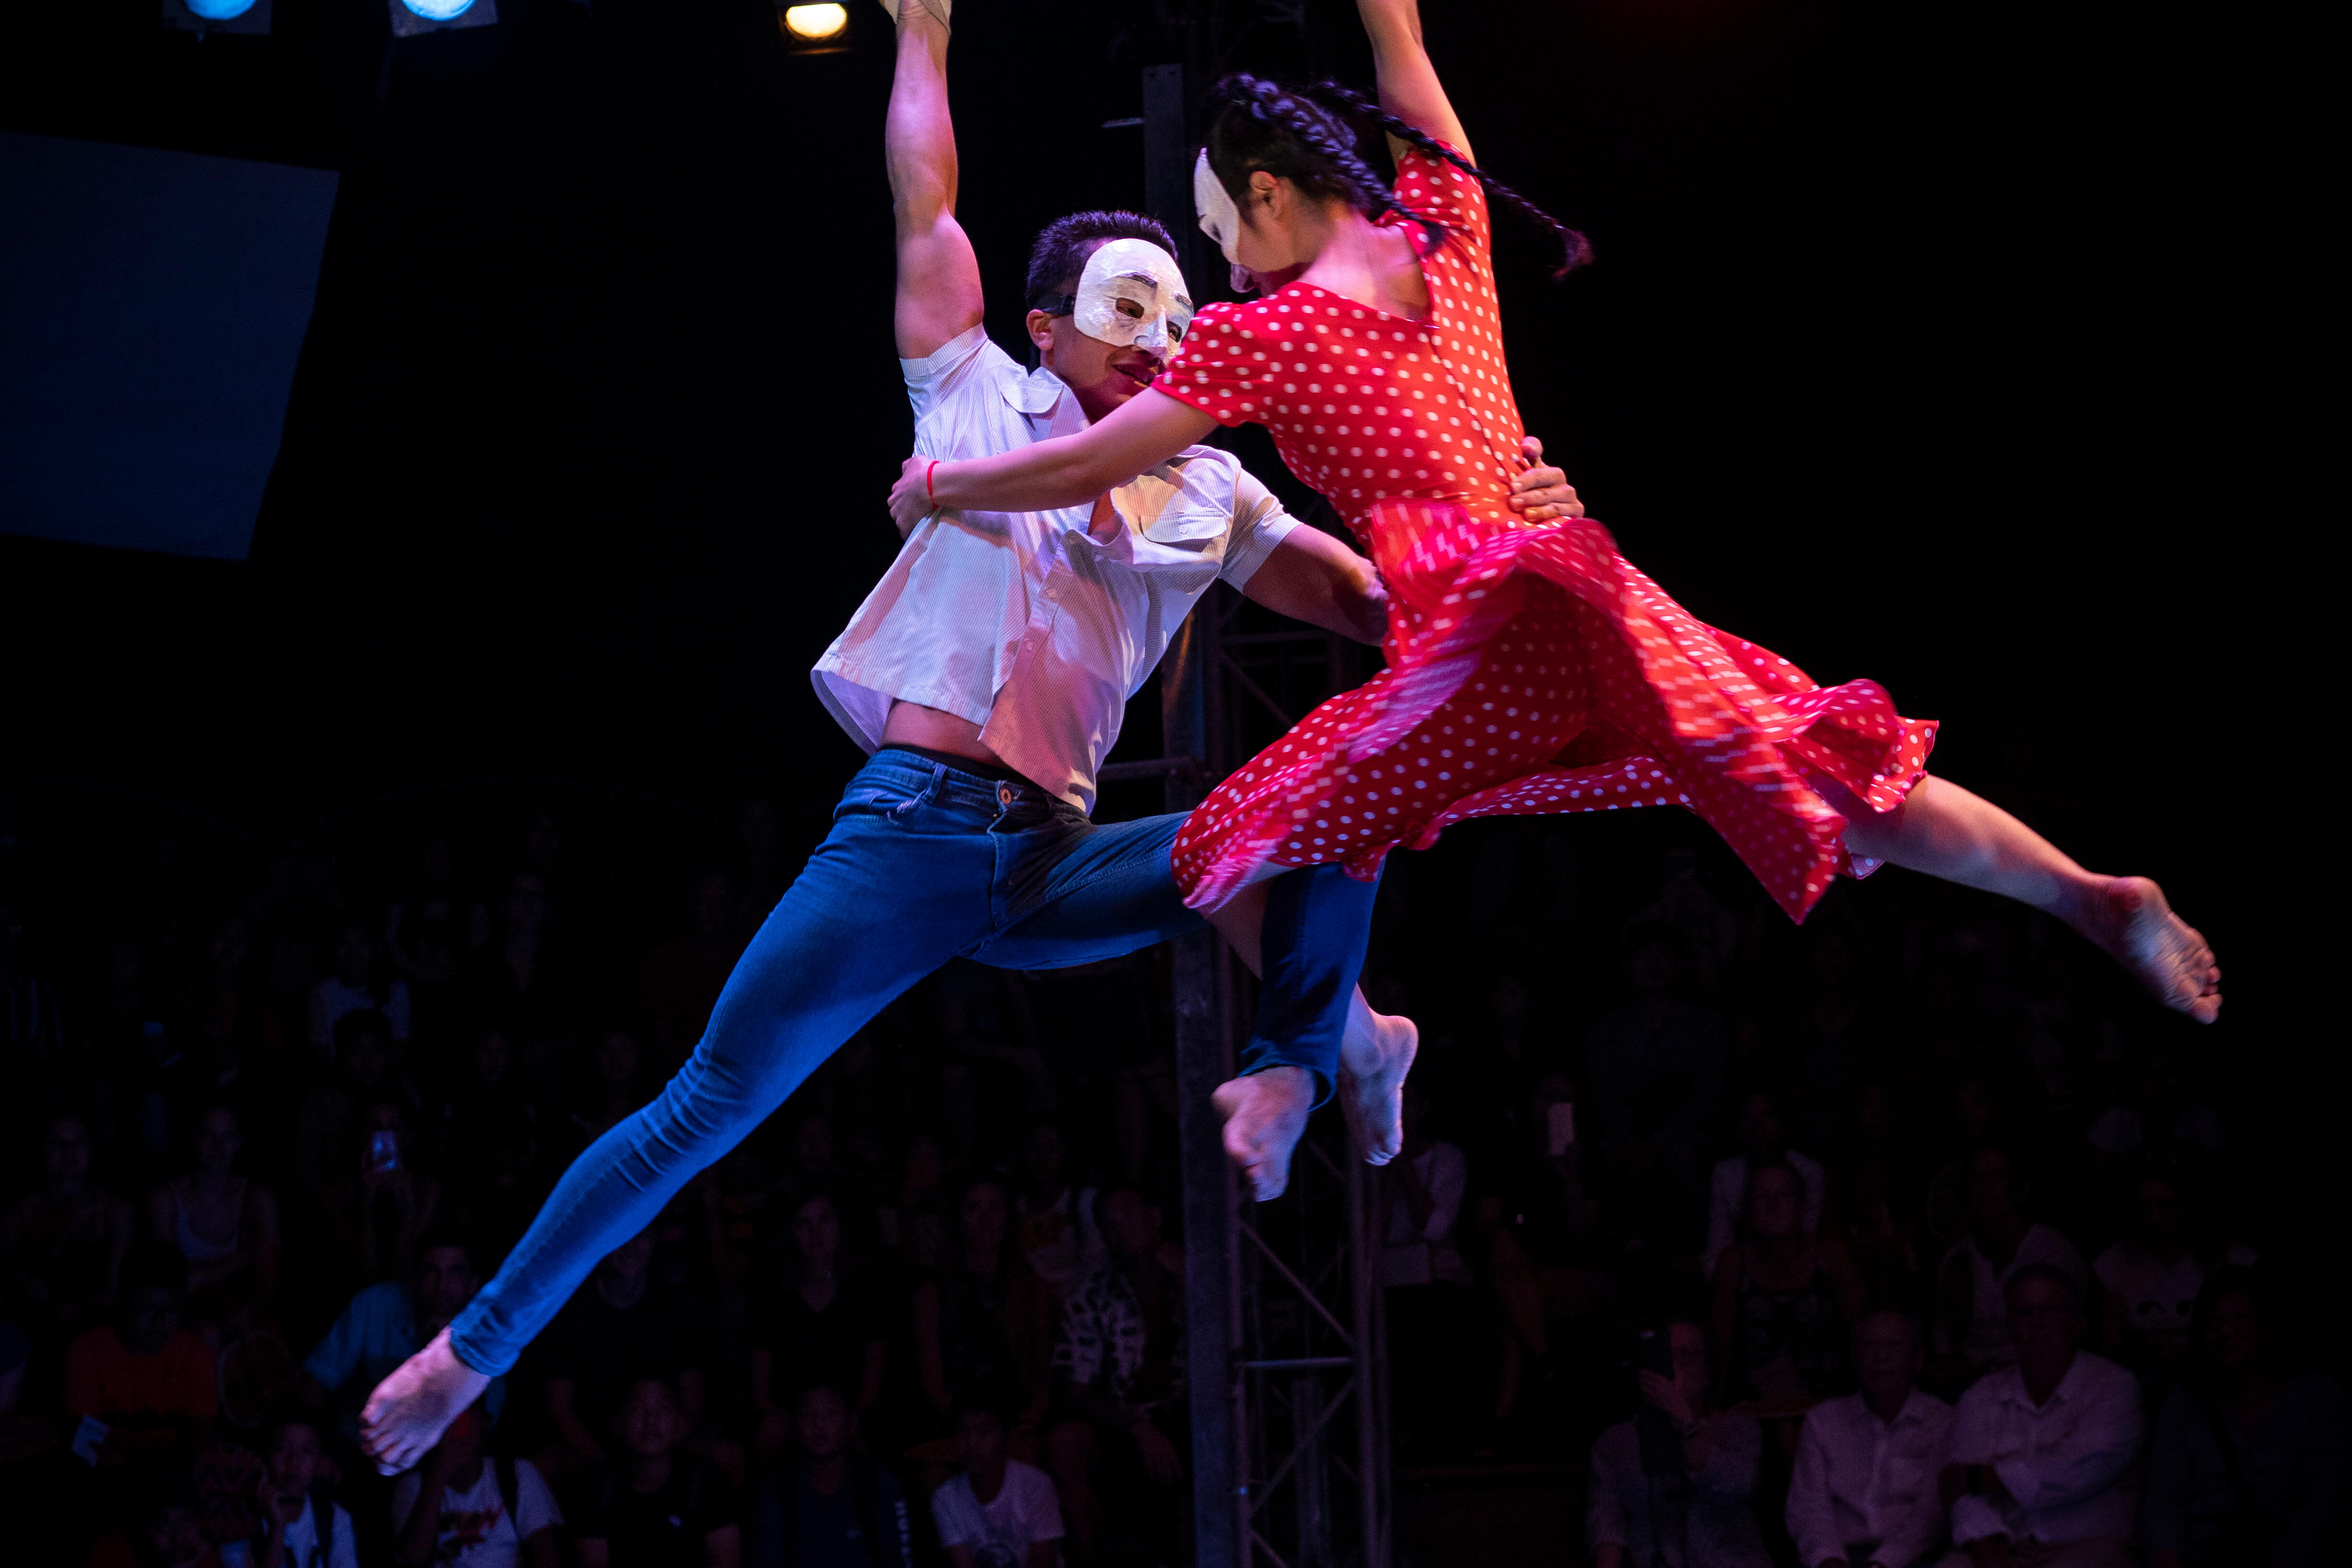 Two circus artists are suspended from ropes as they perform an aerial stunt at Phare circus